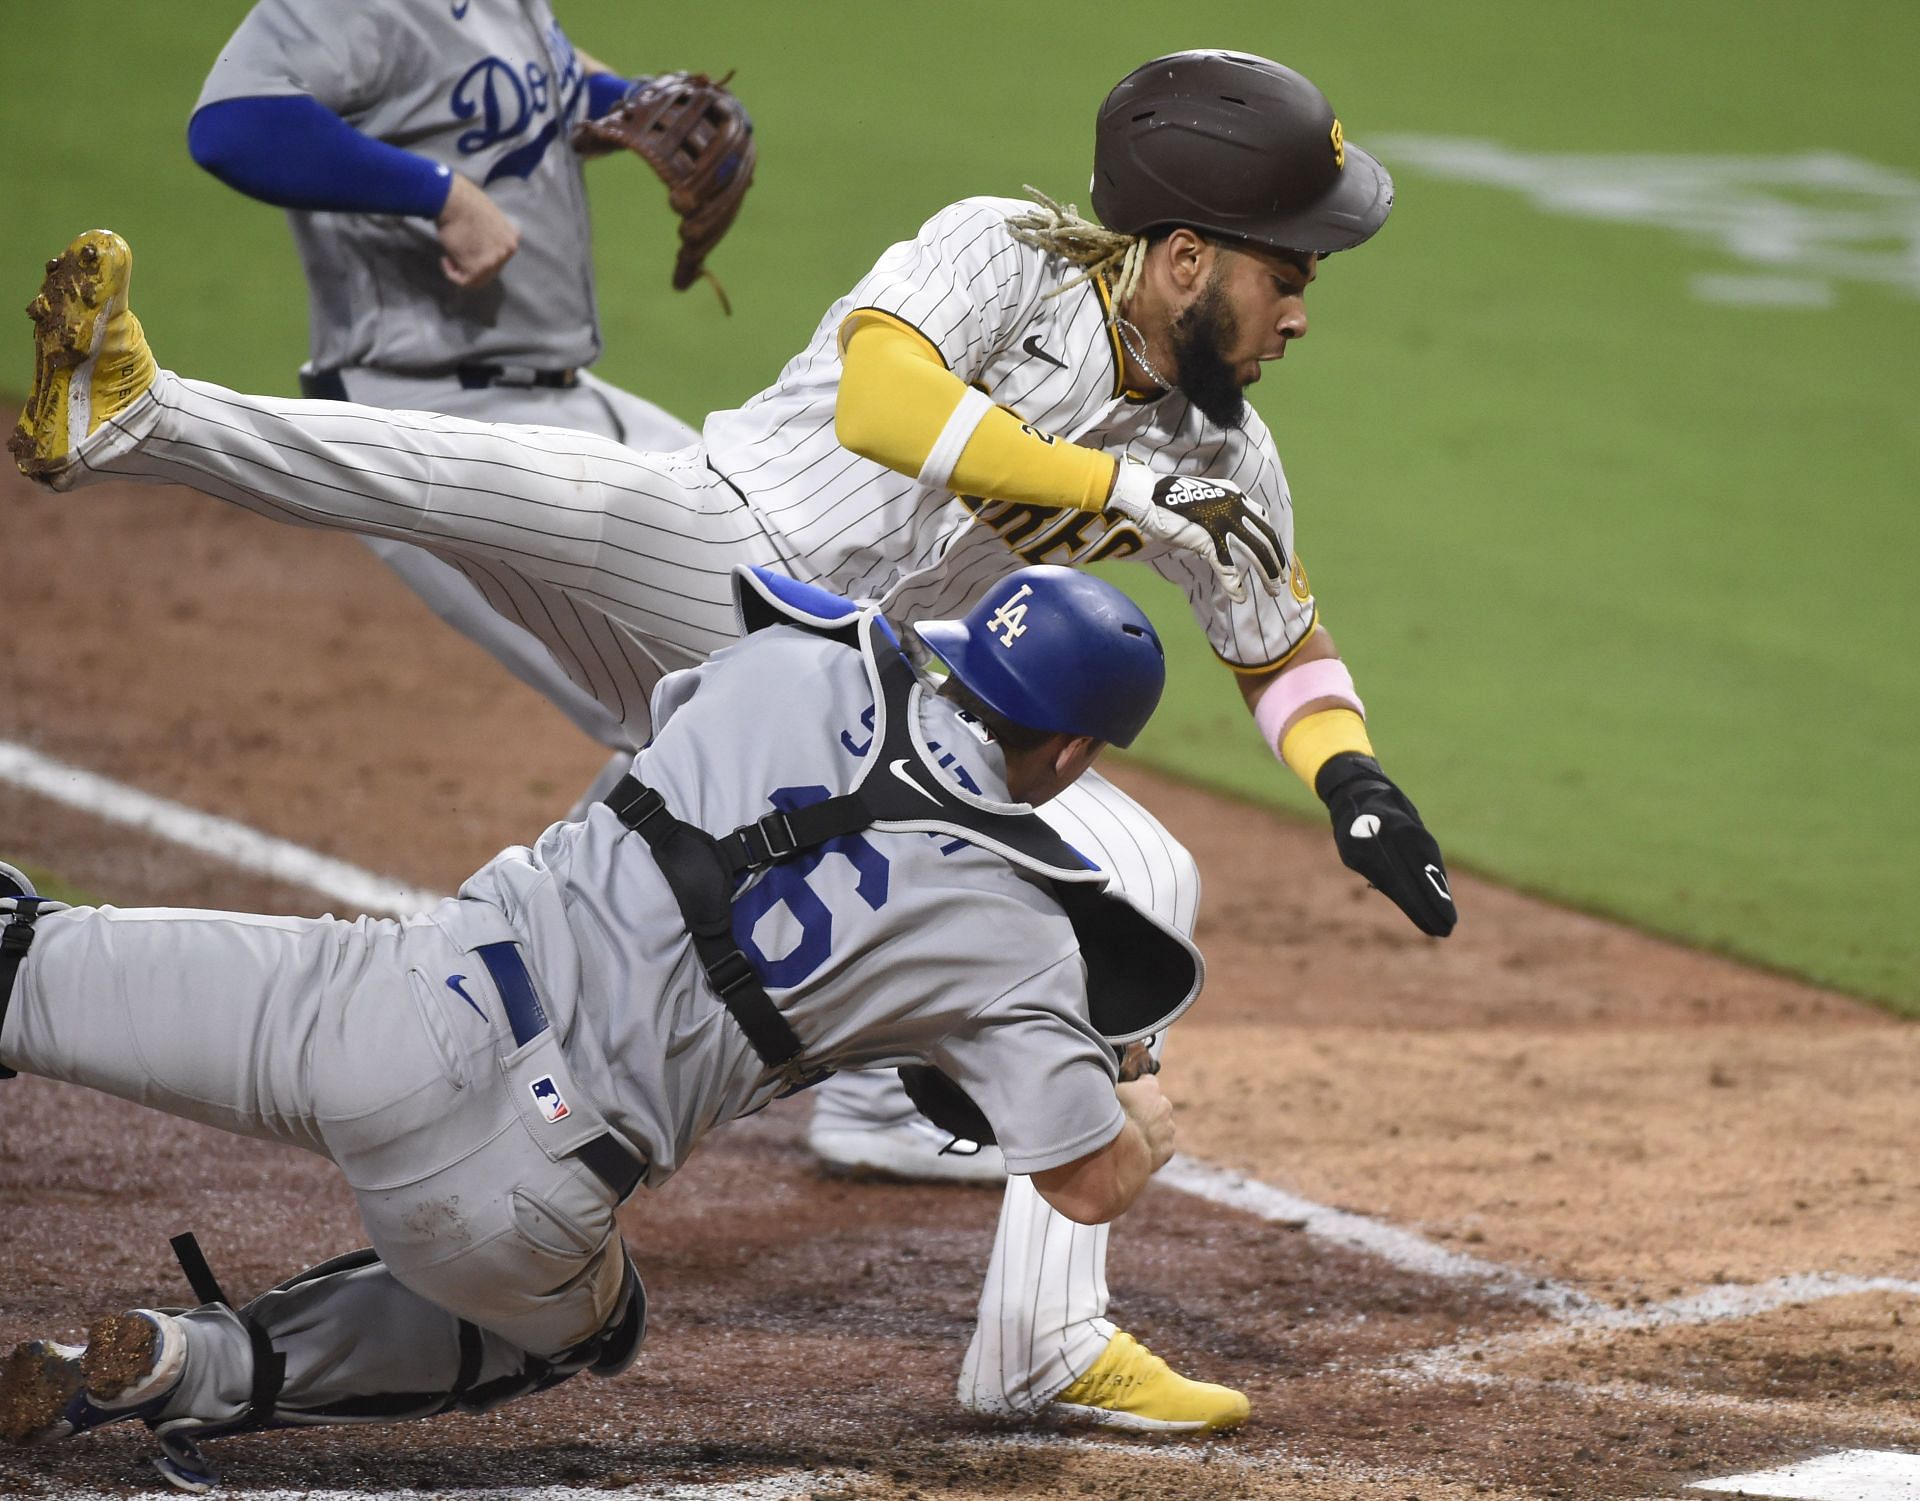 He is making the slap proud - Los Angeles Dodgers catcher Will Smith  smacks a home run against the Chicago White Sox, jokes abound on Twitter